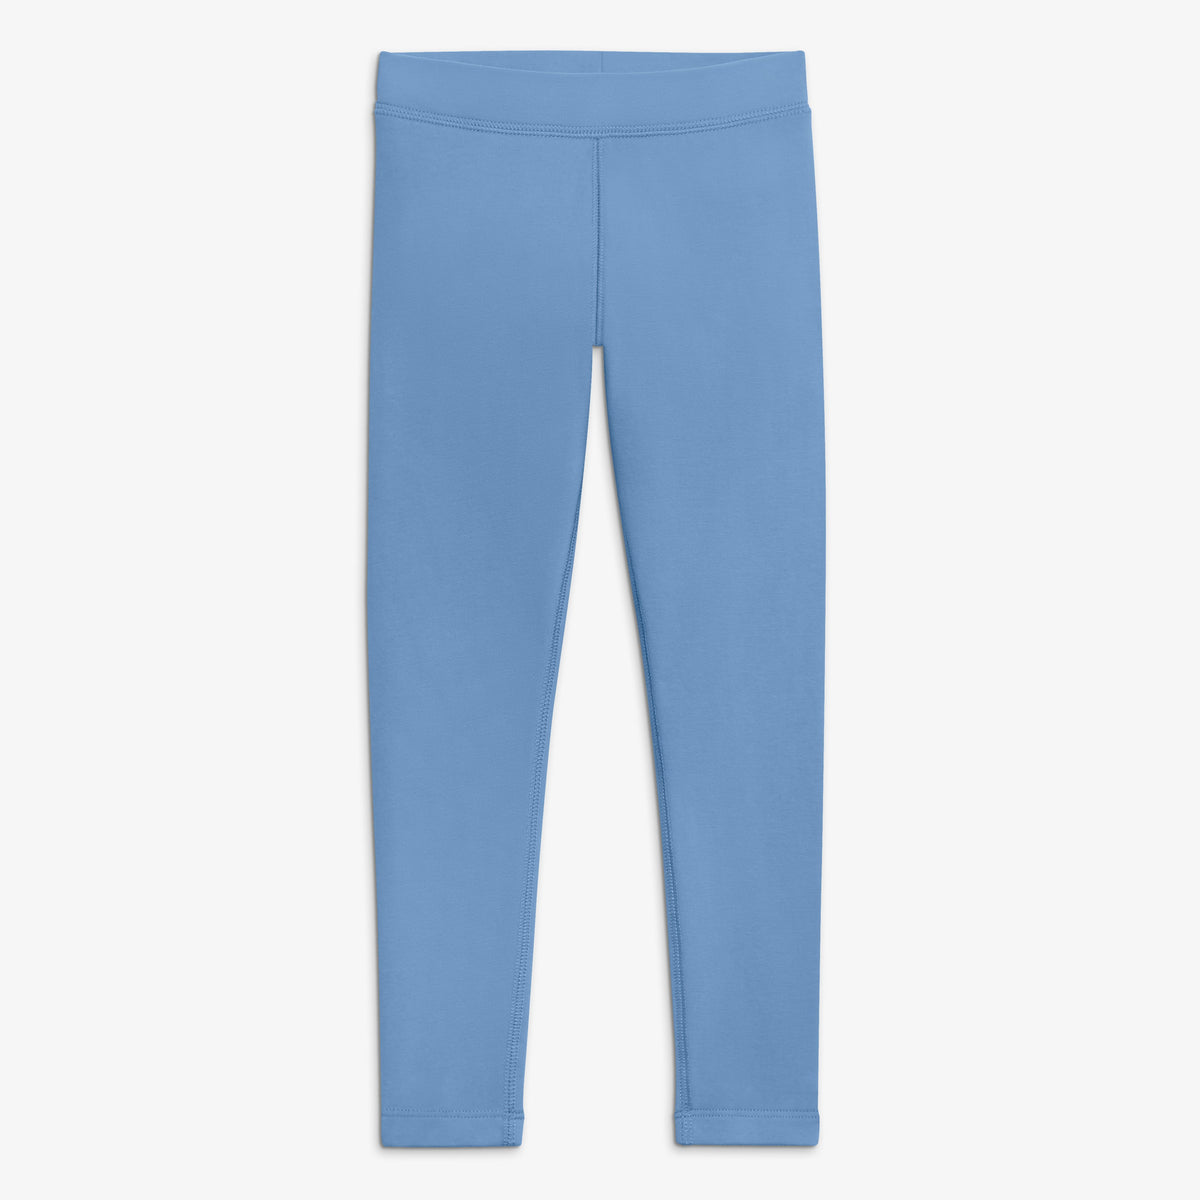 Cozy stretch french terry legging in seasonal colors